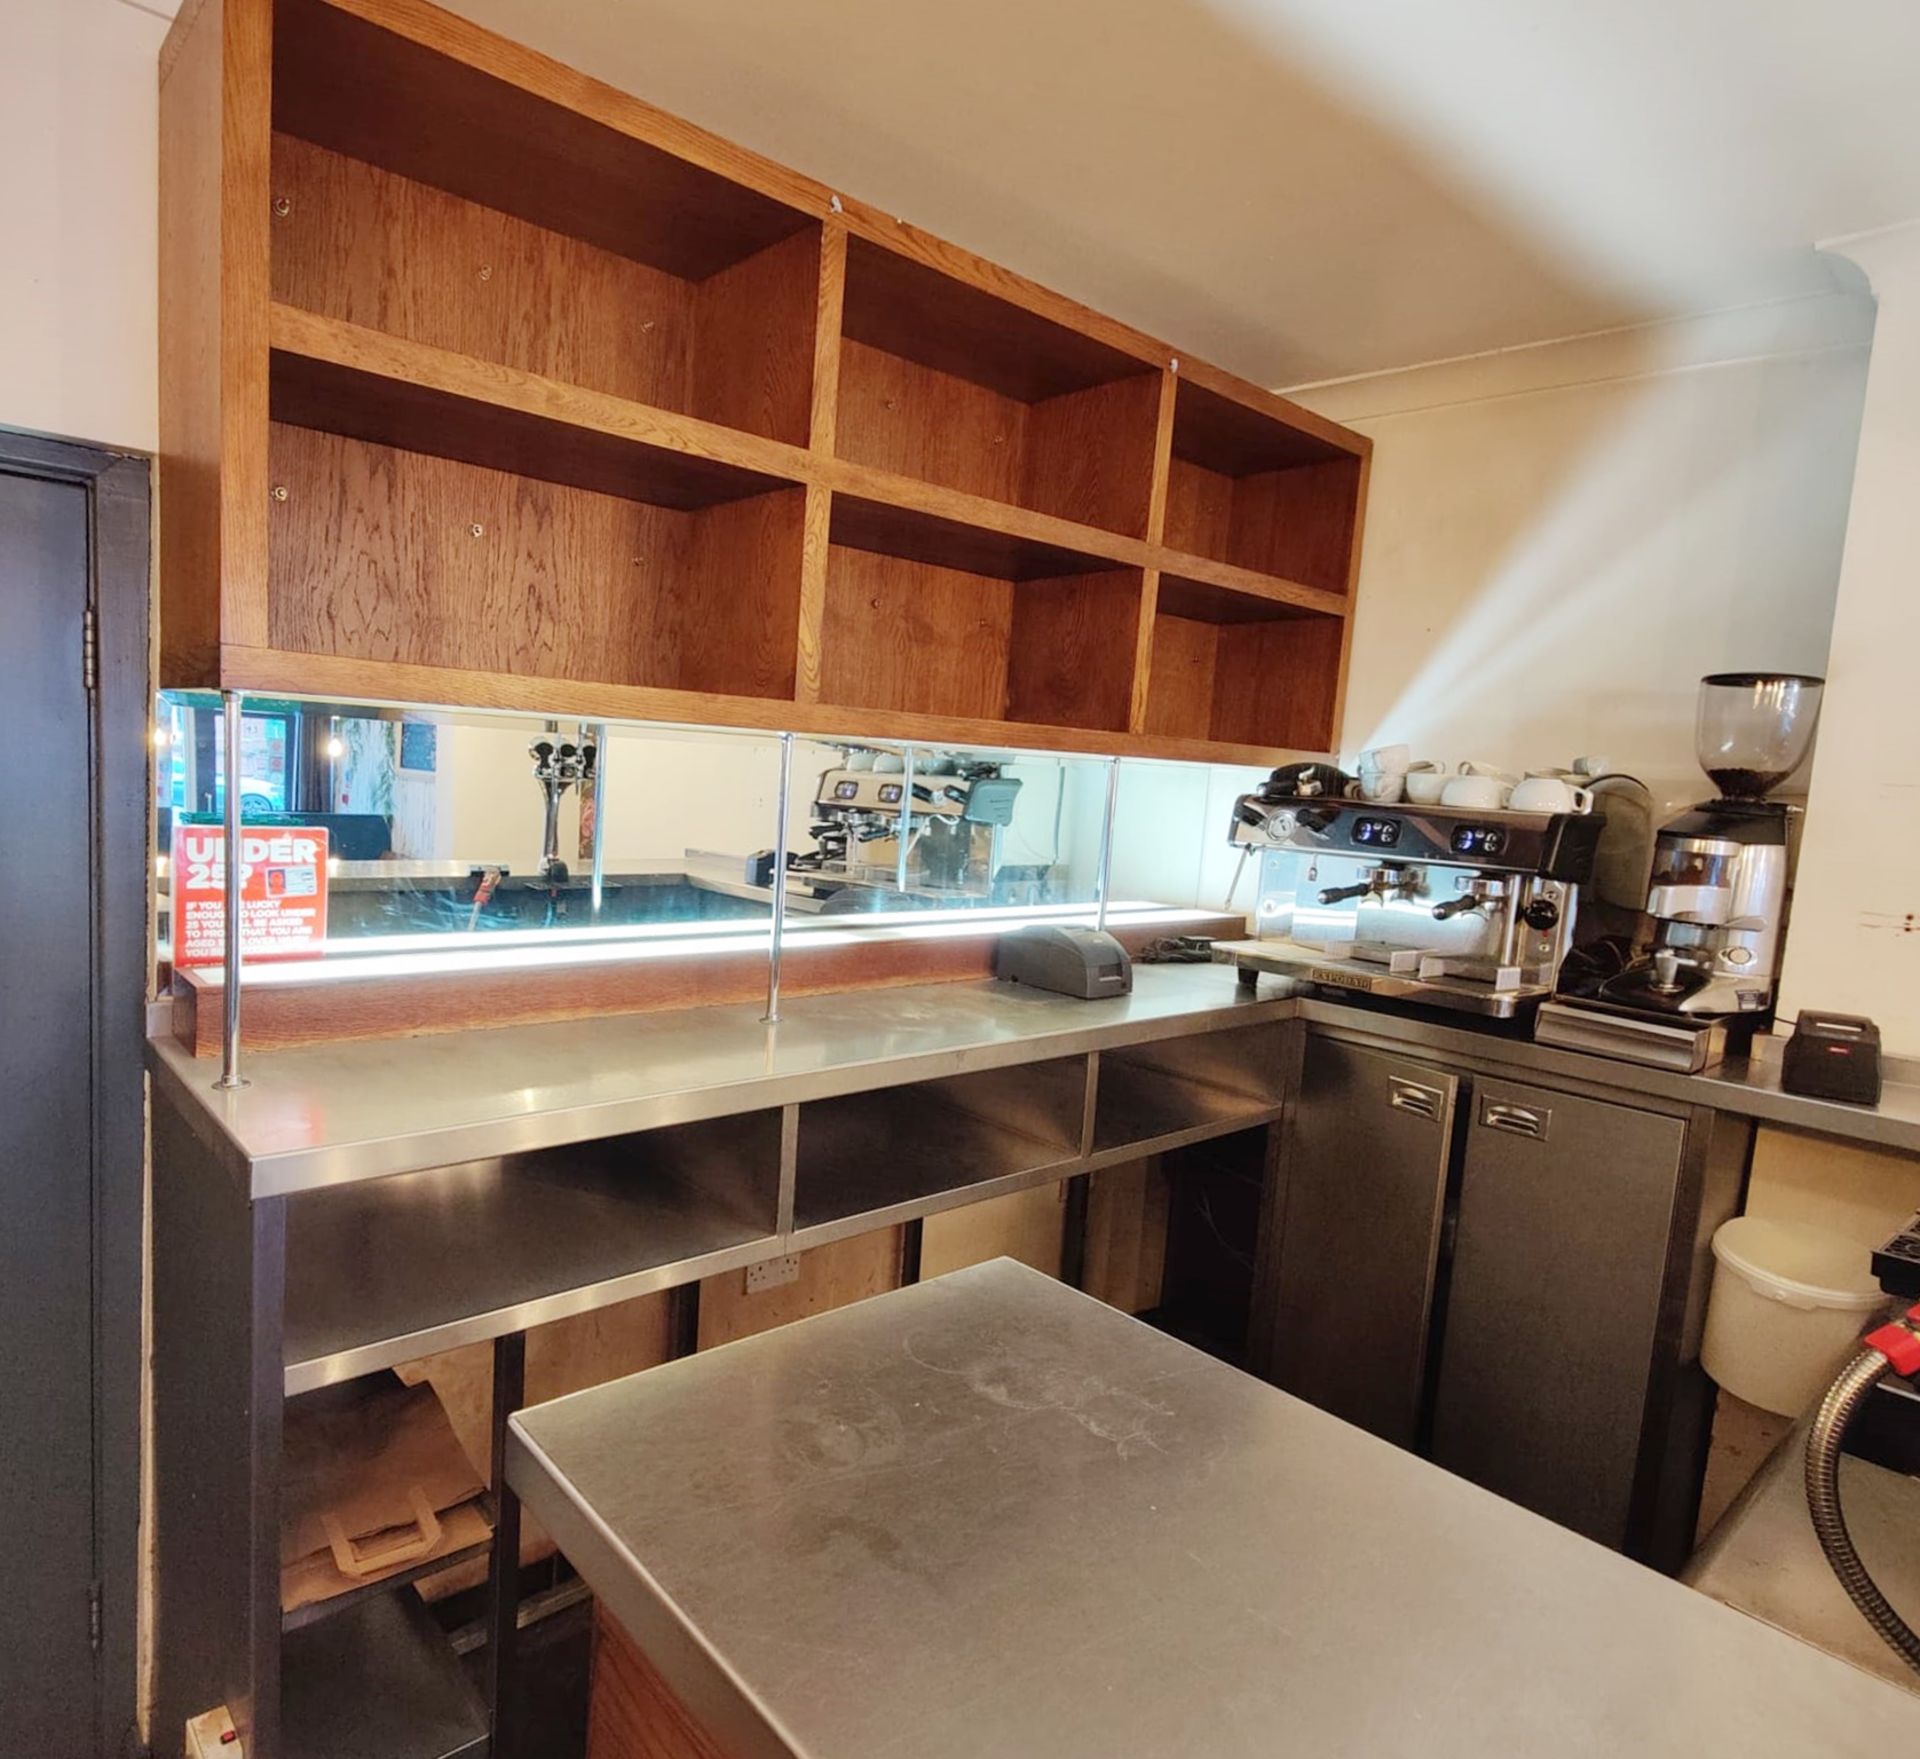 1 x Contemporary Curved Wooden Drinks Bar Featuring a Stainless Steel Bartop and Backbar - Image 3 of 22